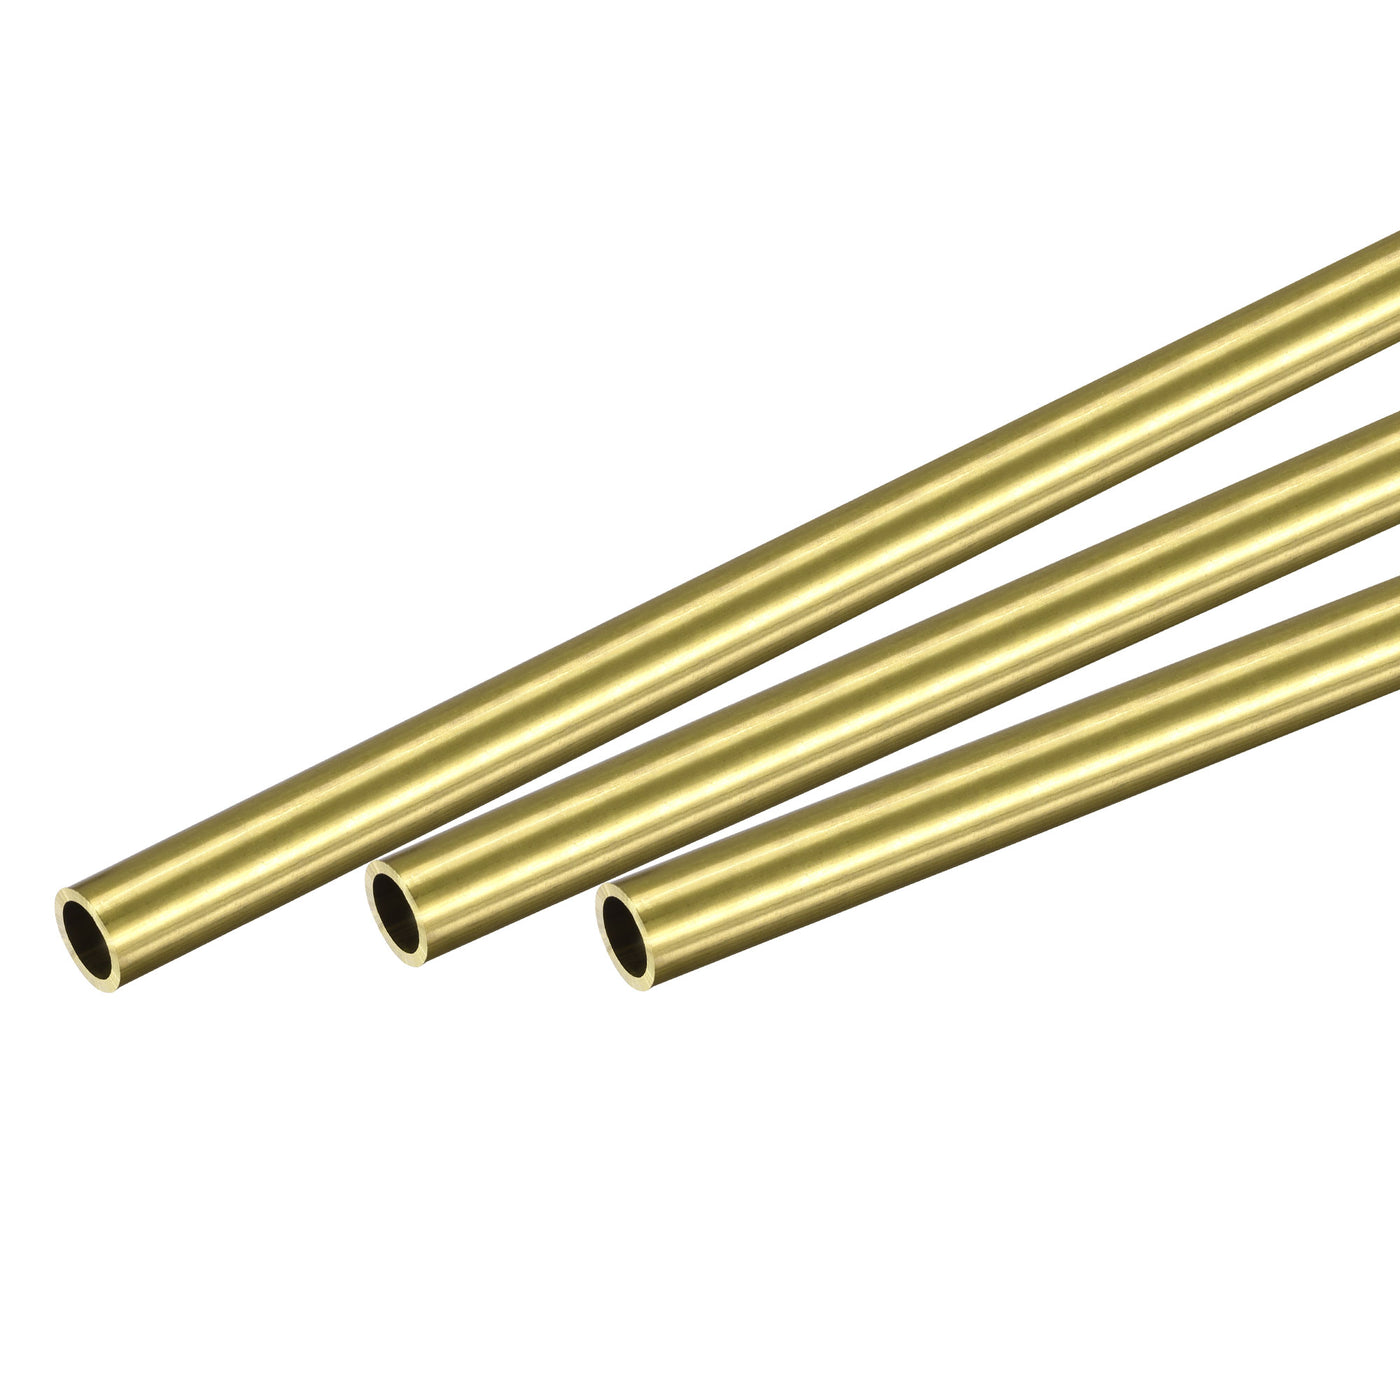 uxcell Uxcell 3Pcs 6mm x 1mm x 400mm Seamless Straight Brass Tube for Industry DIY Projects